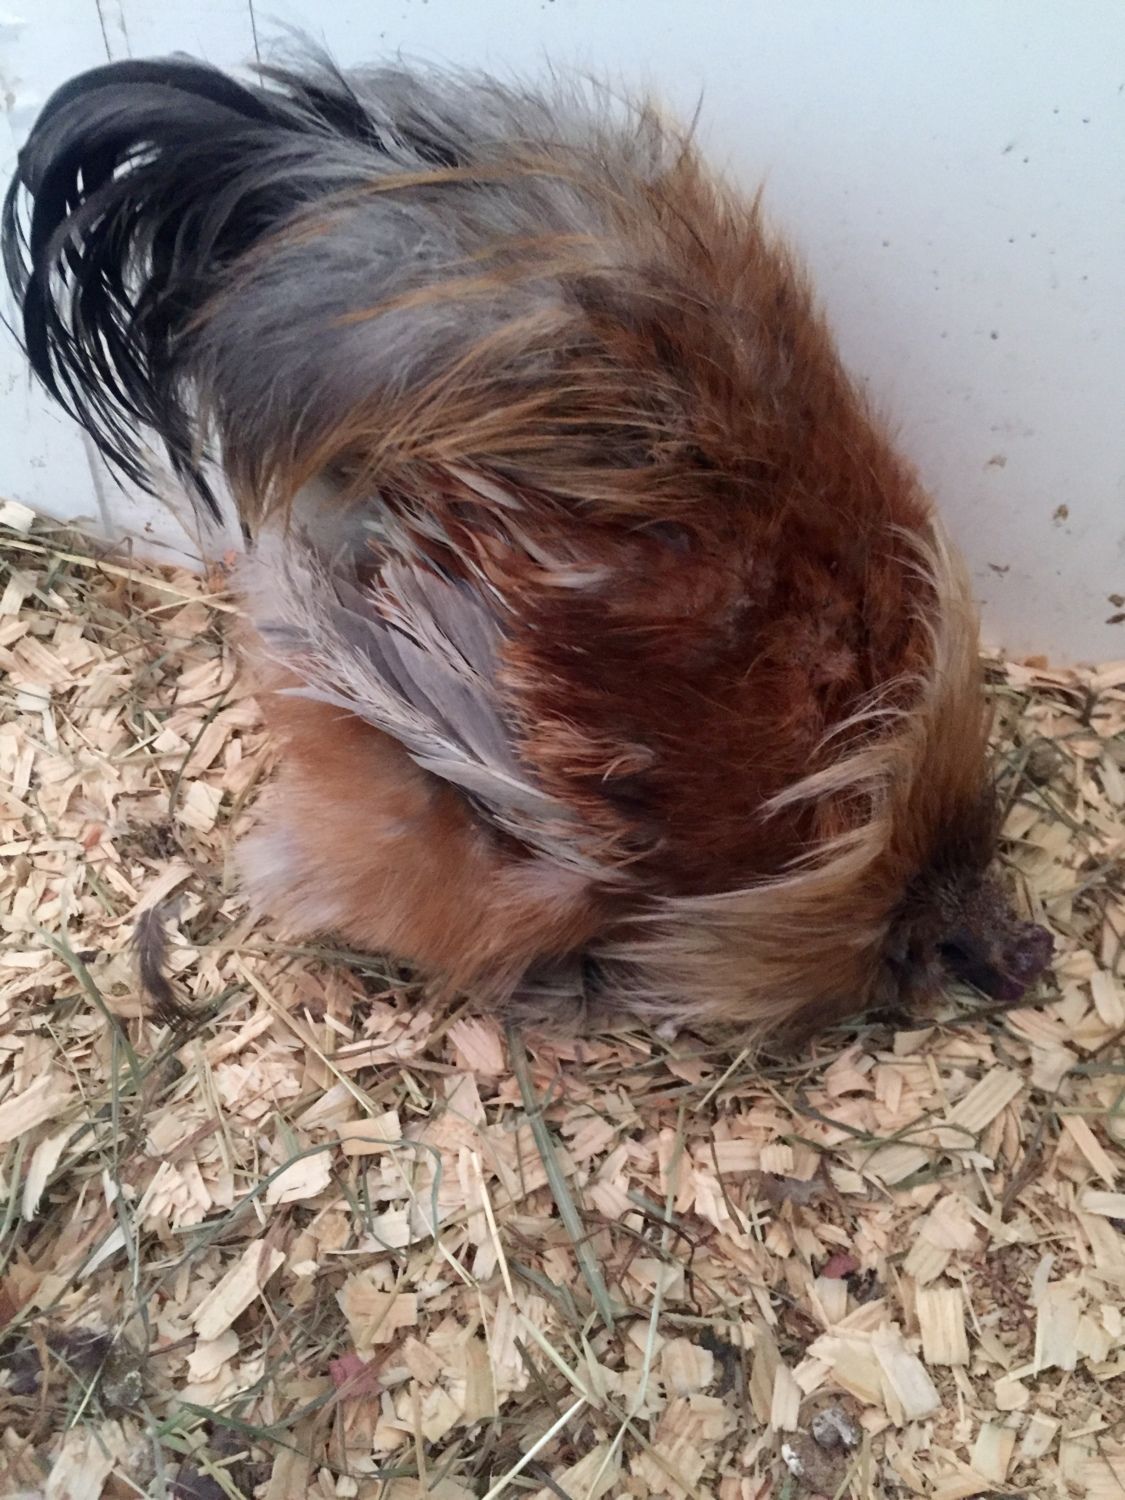 Rooster Keeps Head Down - What's Wrong?